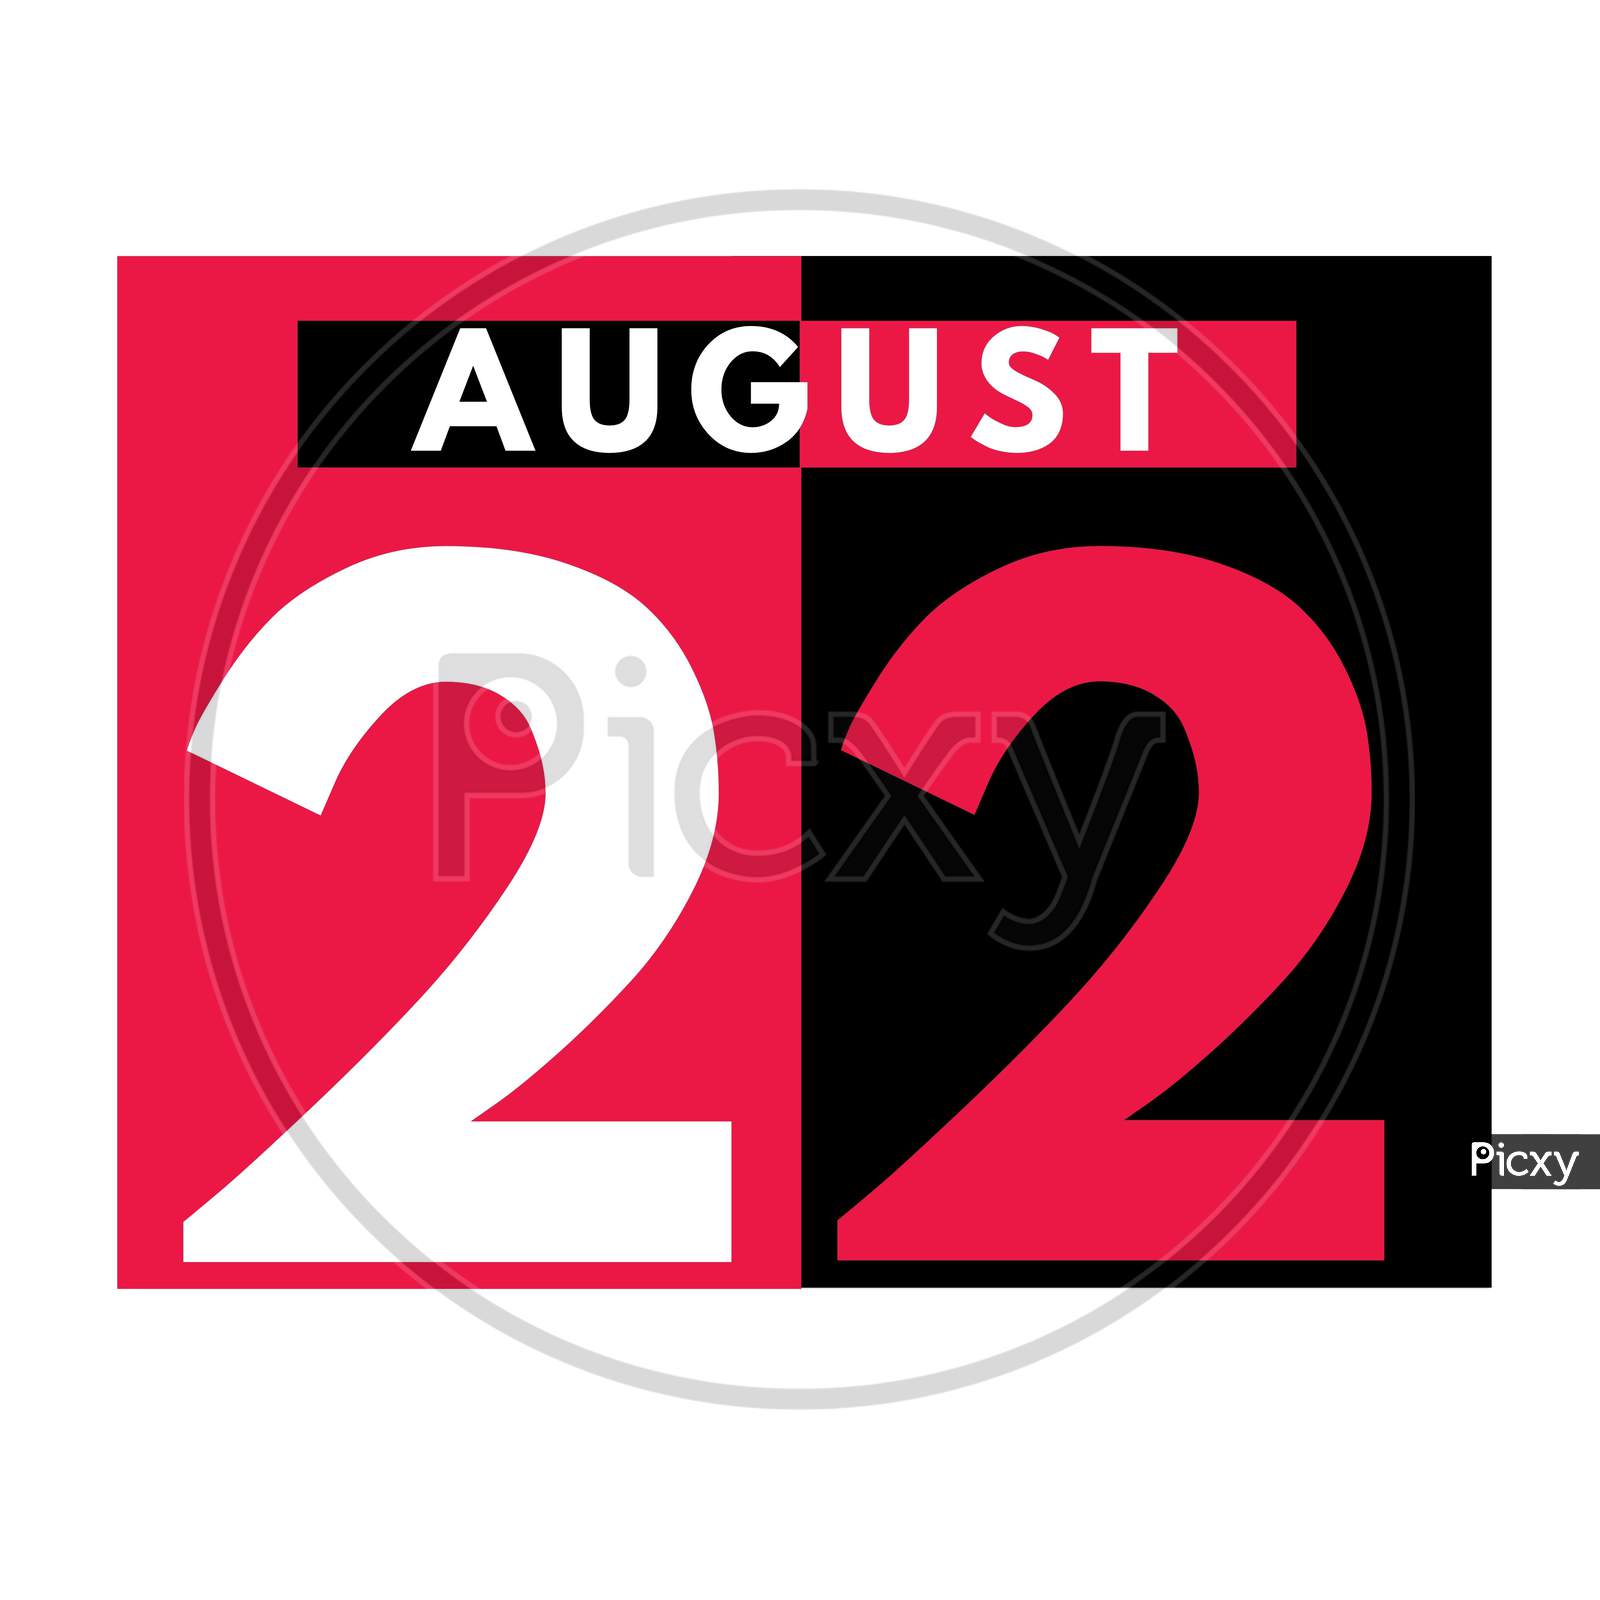 August 22 . Modern Daily Calendar Icon .Date ,Day, Month .Calendar For The Month Of August